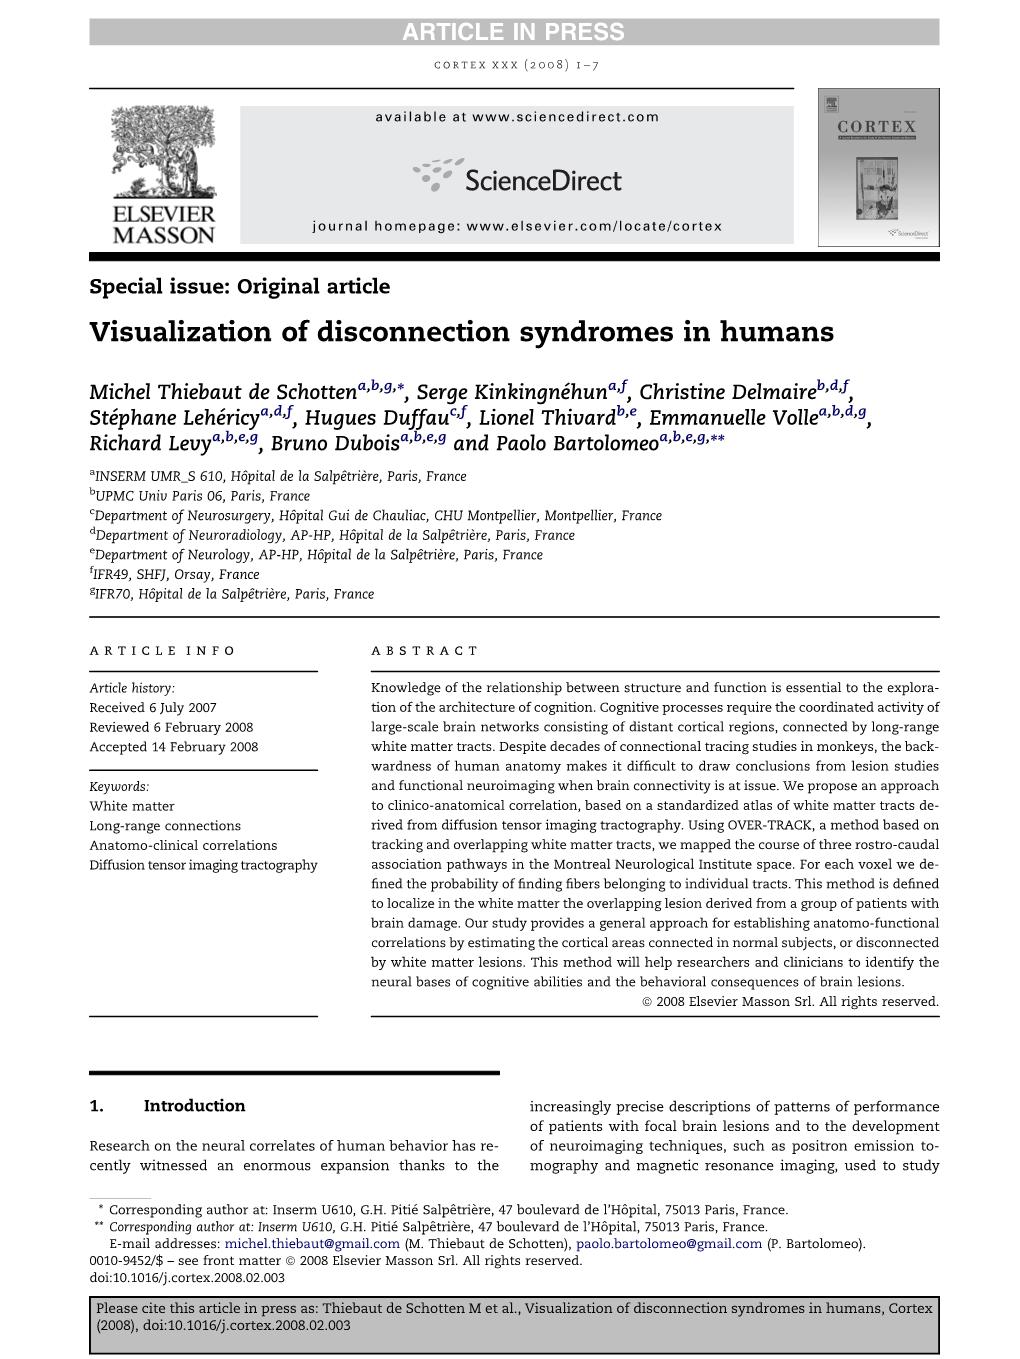 Visualization of Disconnection Syndromes in Humans